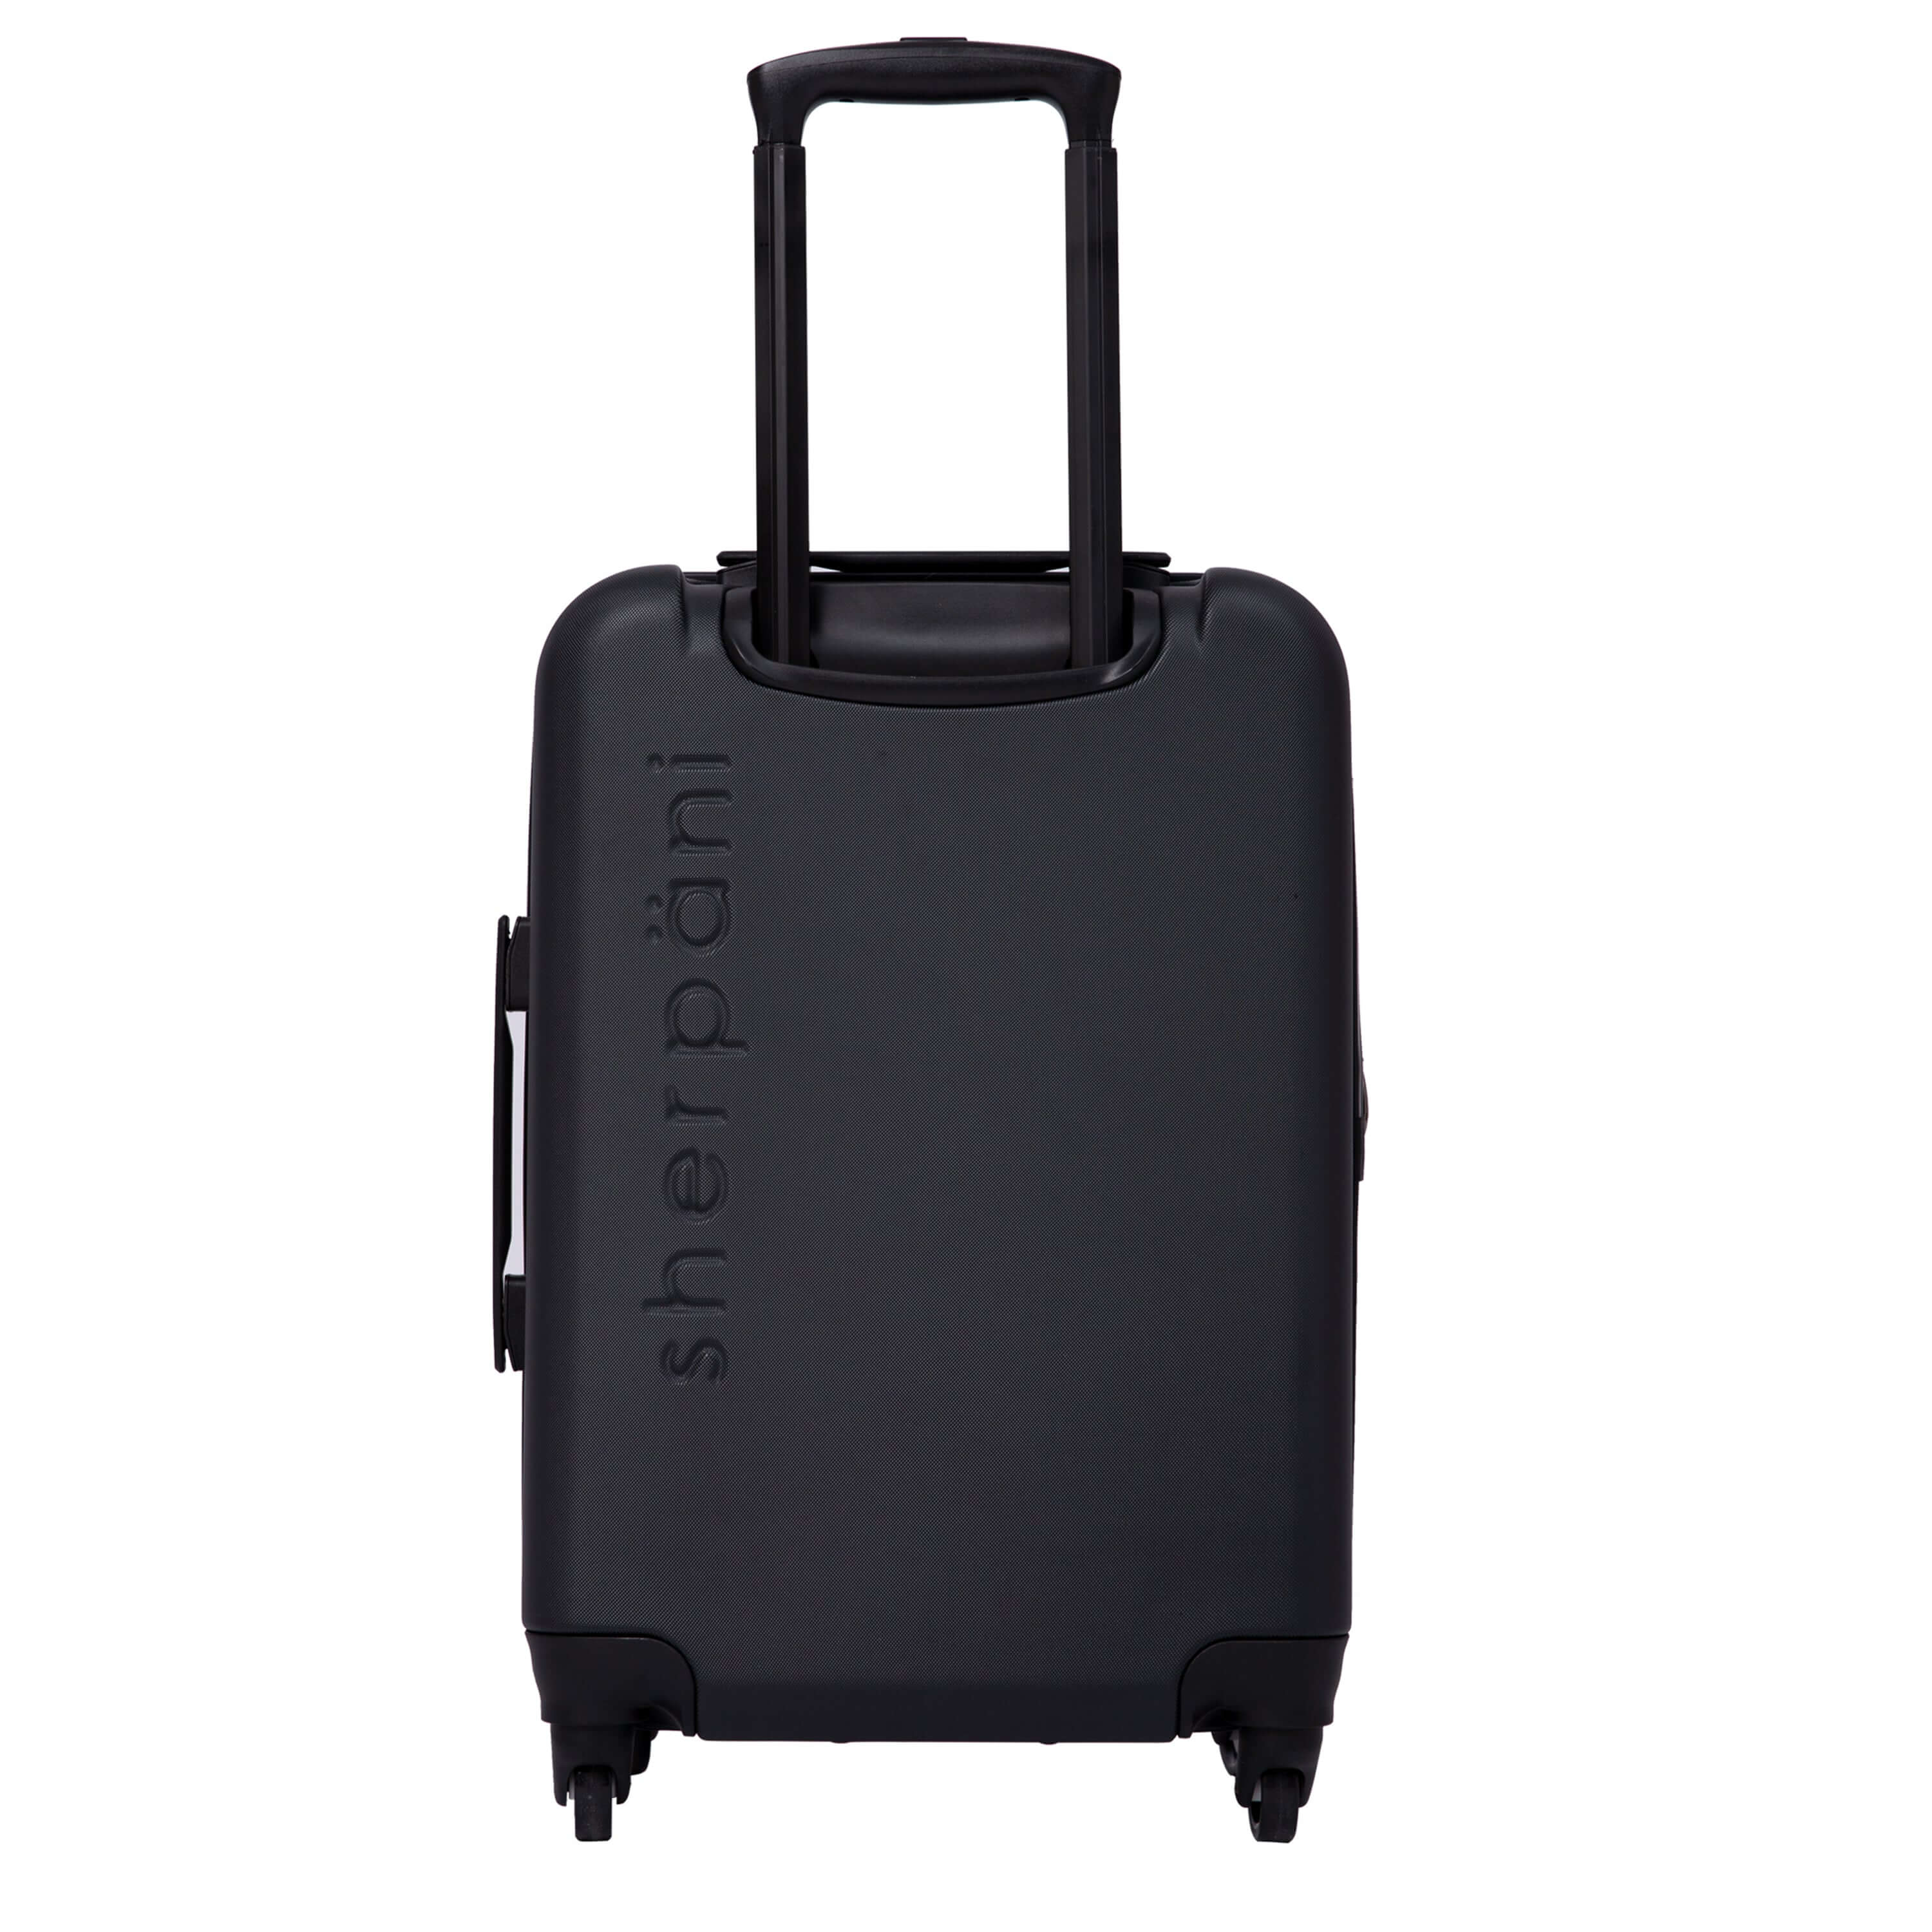 Back view of Sherpani hard-shell carry-on luggage, the Meridian in Black. Meridian features include a retractable luggage handle, uncrushable exterior, TSA-approved locking zippers and four 36-degree spinner wheels. 